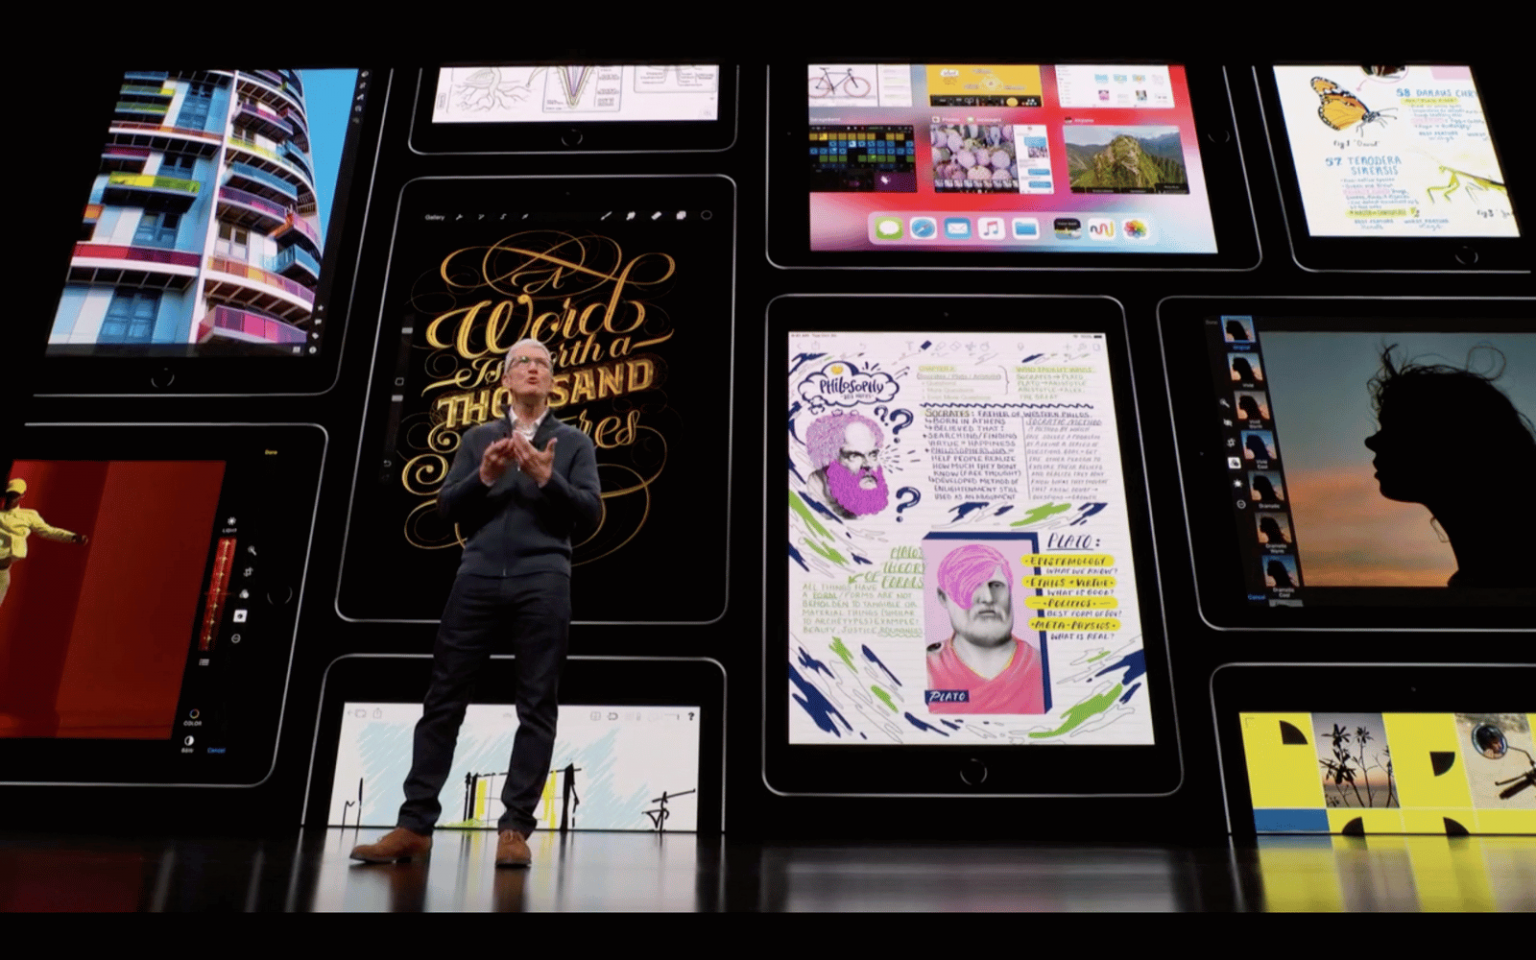 Tim Cook introduces the iPad Pro